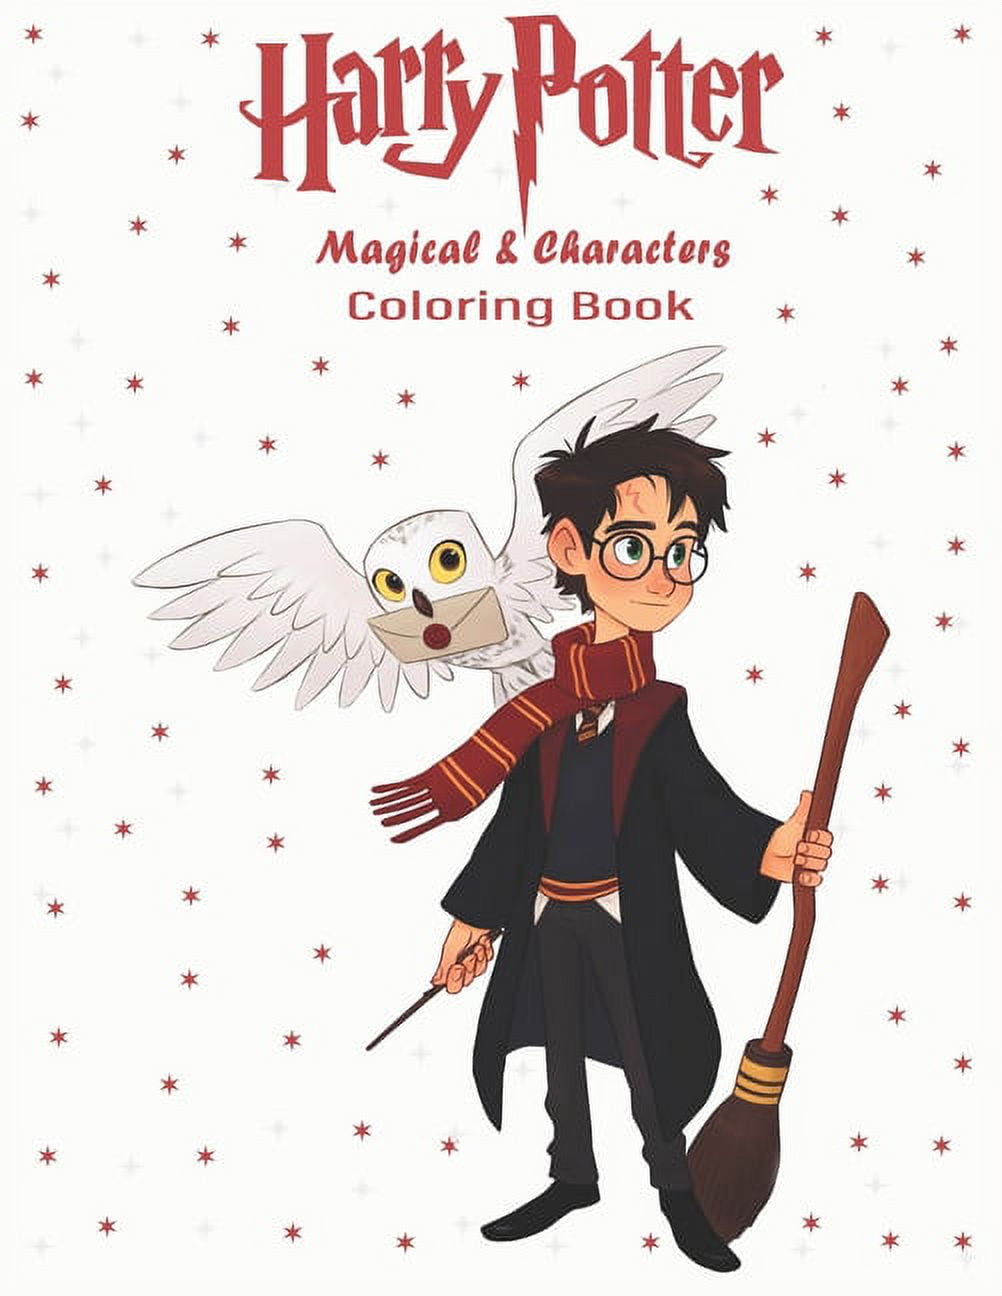 Harry Potter Colouring Book #3 Magical Places & Characters by